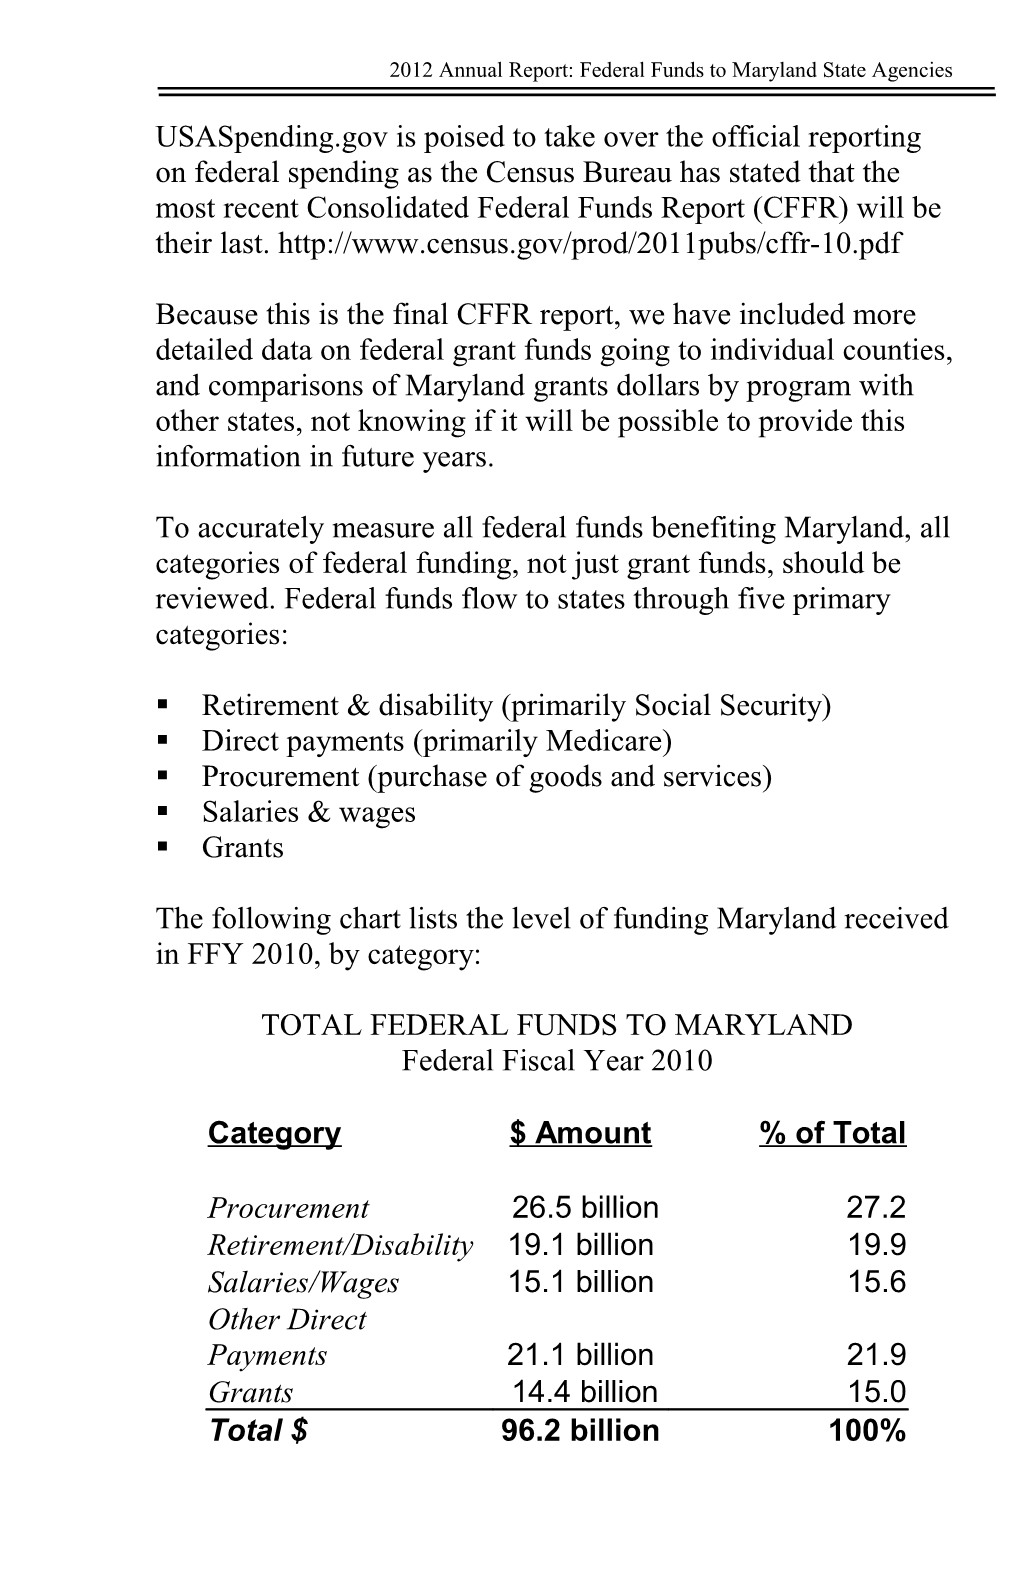 2012Annual Report: Federal Funds to Maryland State Agencies